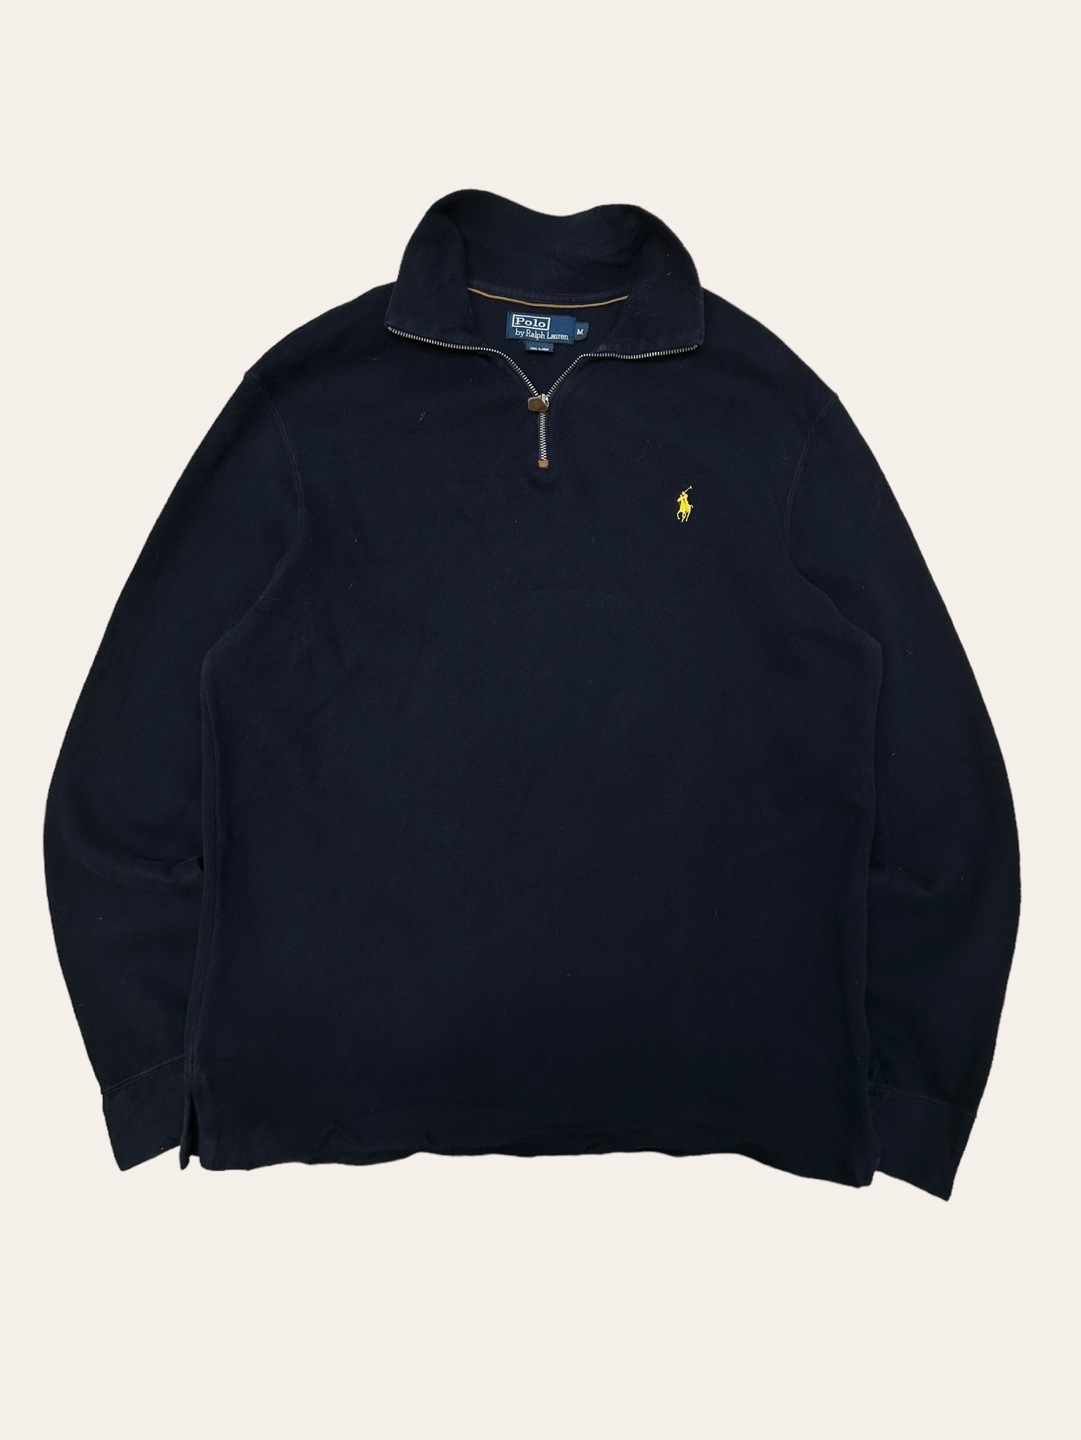 (From USA)Polo ralph lauren navy color cotton pullover M